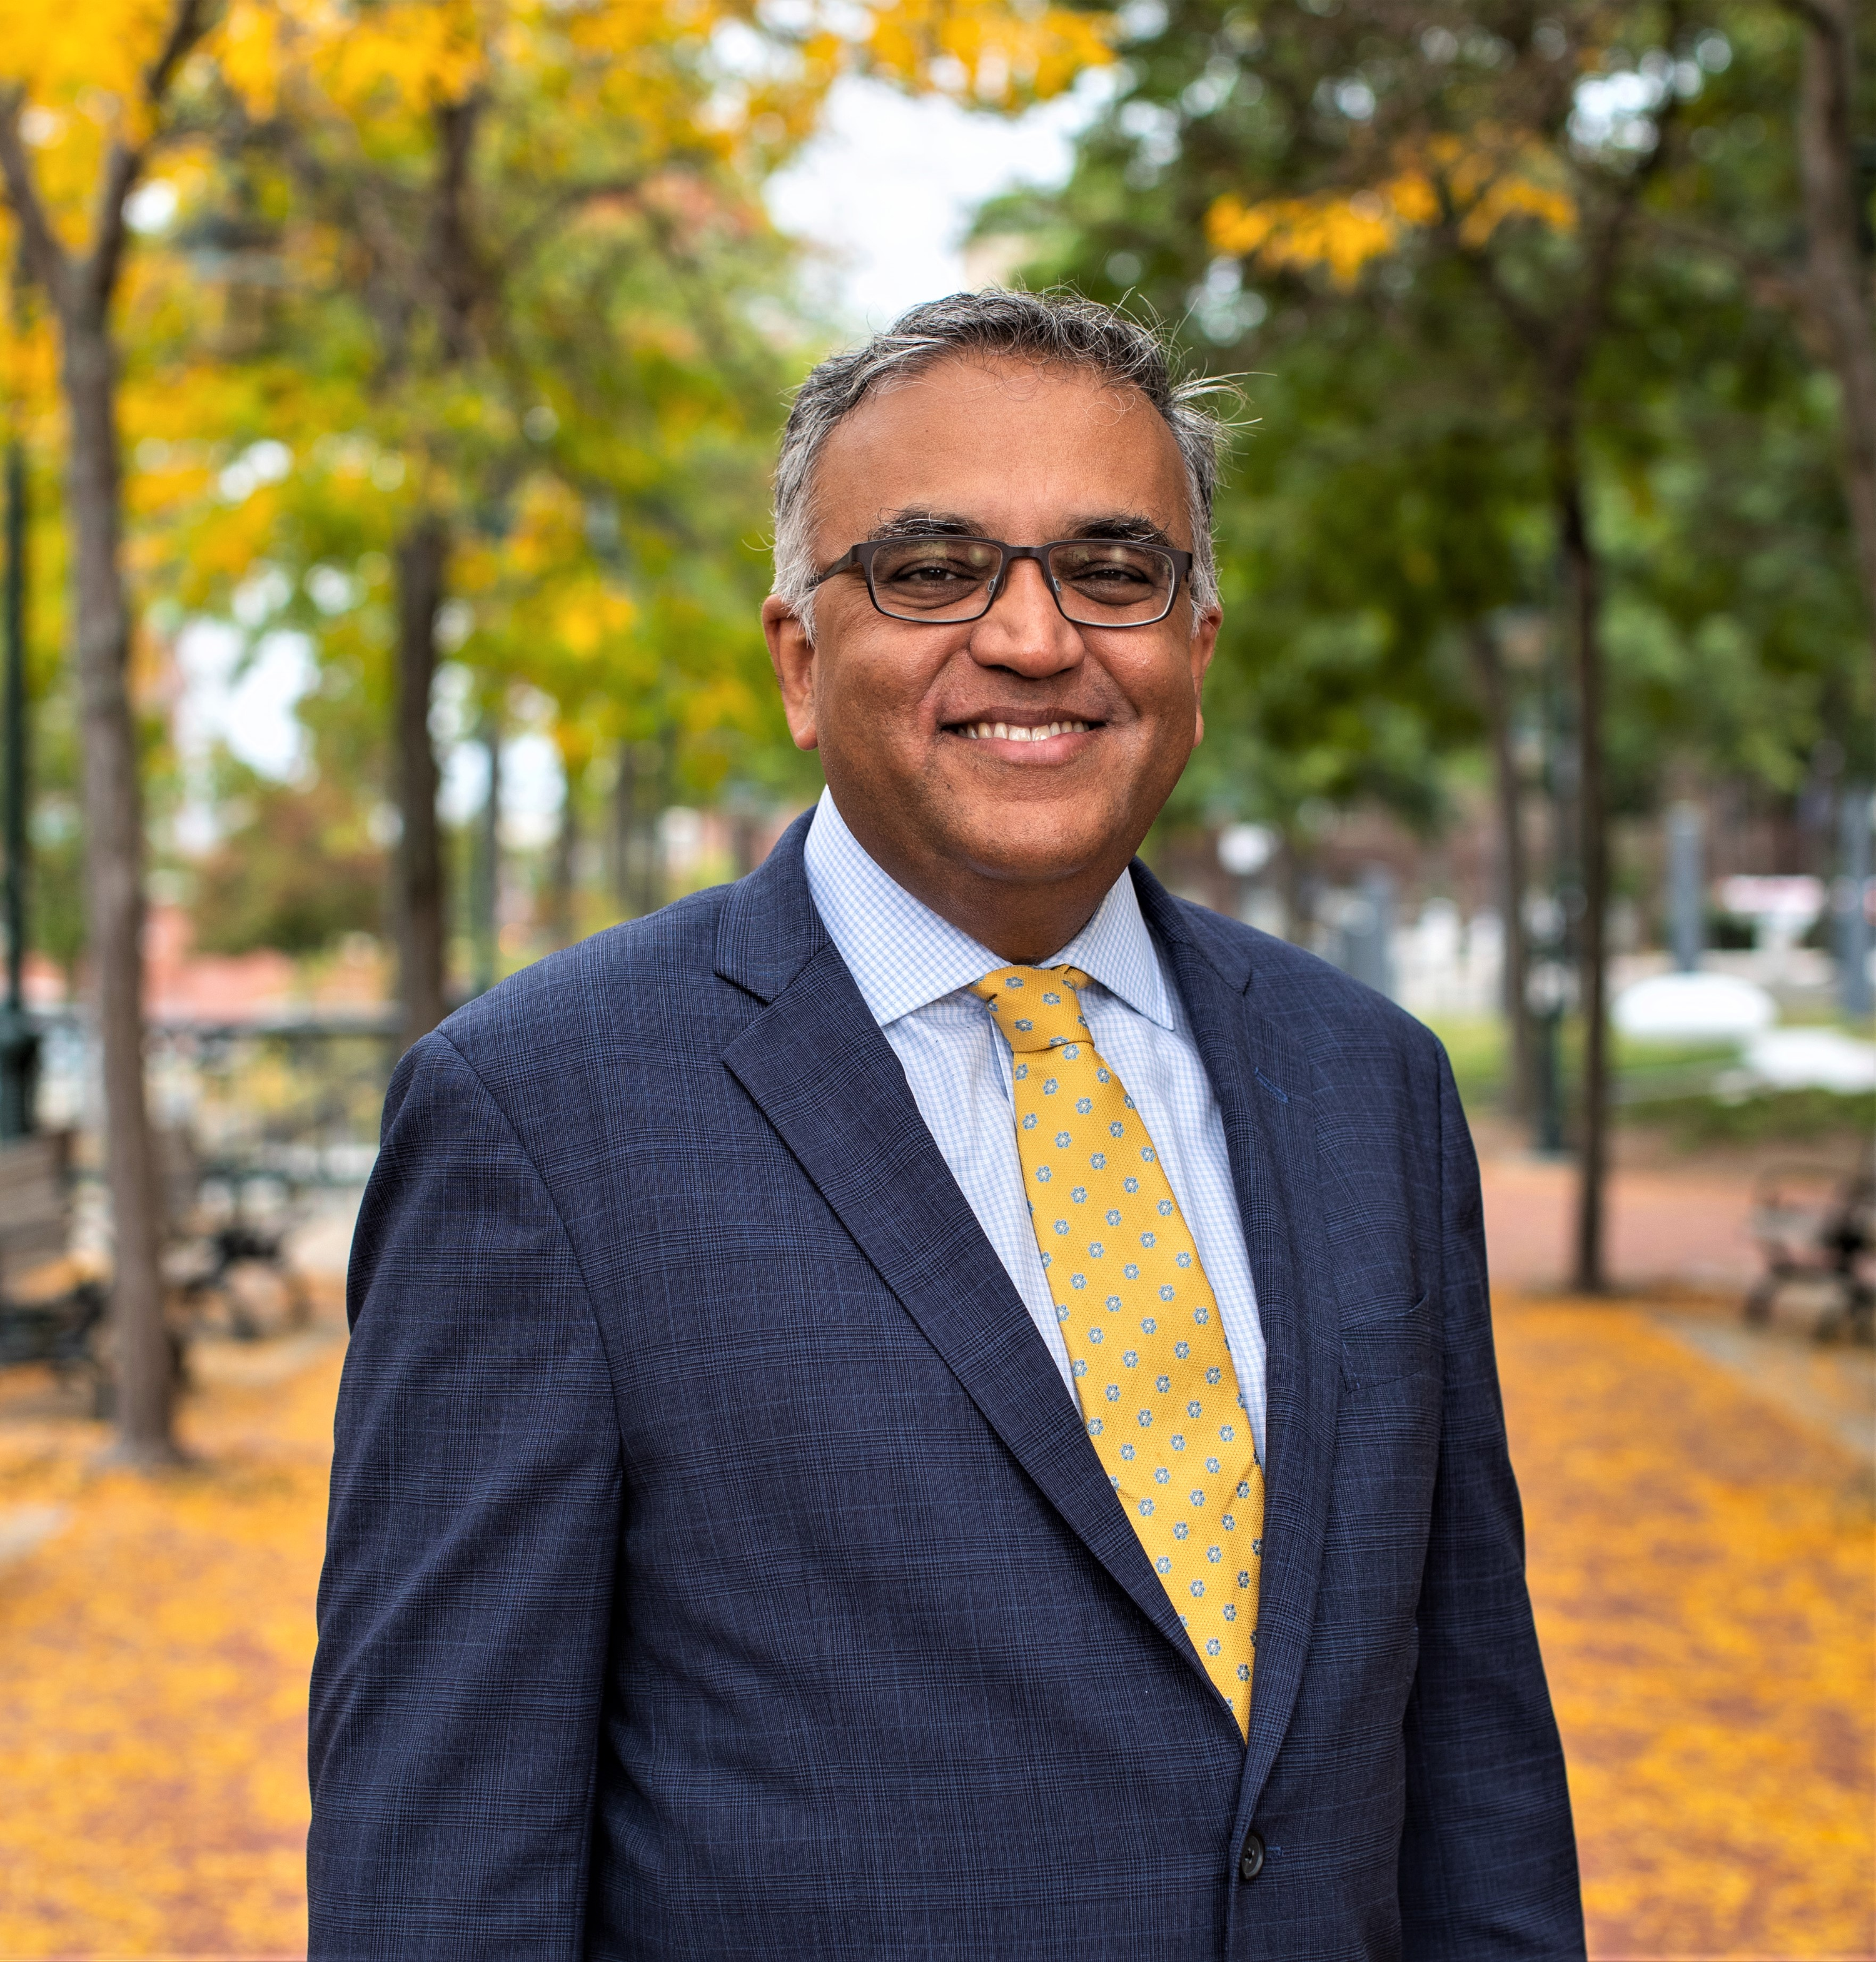 Welcome to Episode 21 of “COVID: What comes next,” an exclusive weekly Providence Journal/USA TODAY NETWORK podcast featuring Dr. Ashish Jha, dean of the Brown University School of Public Health and an internationally respected expert on pandemic response and preparedness.